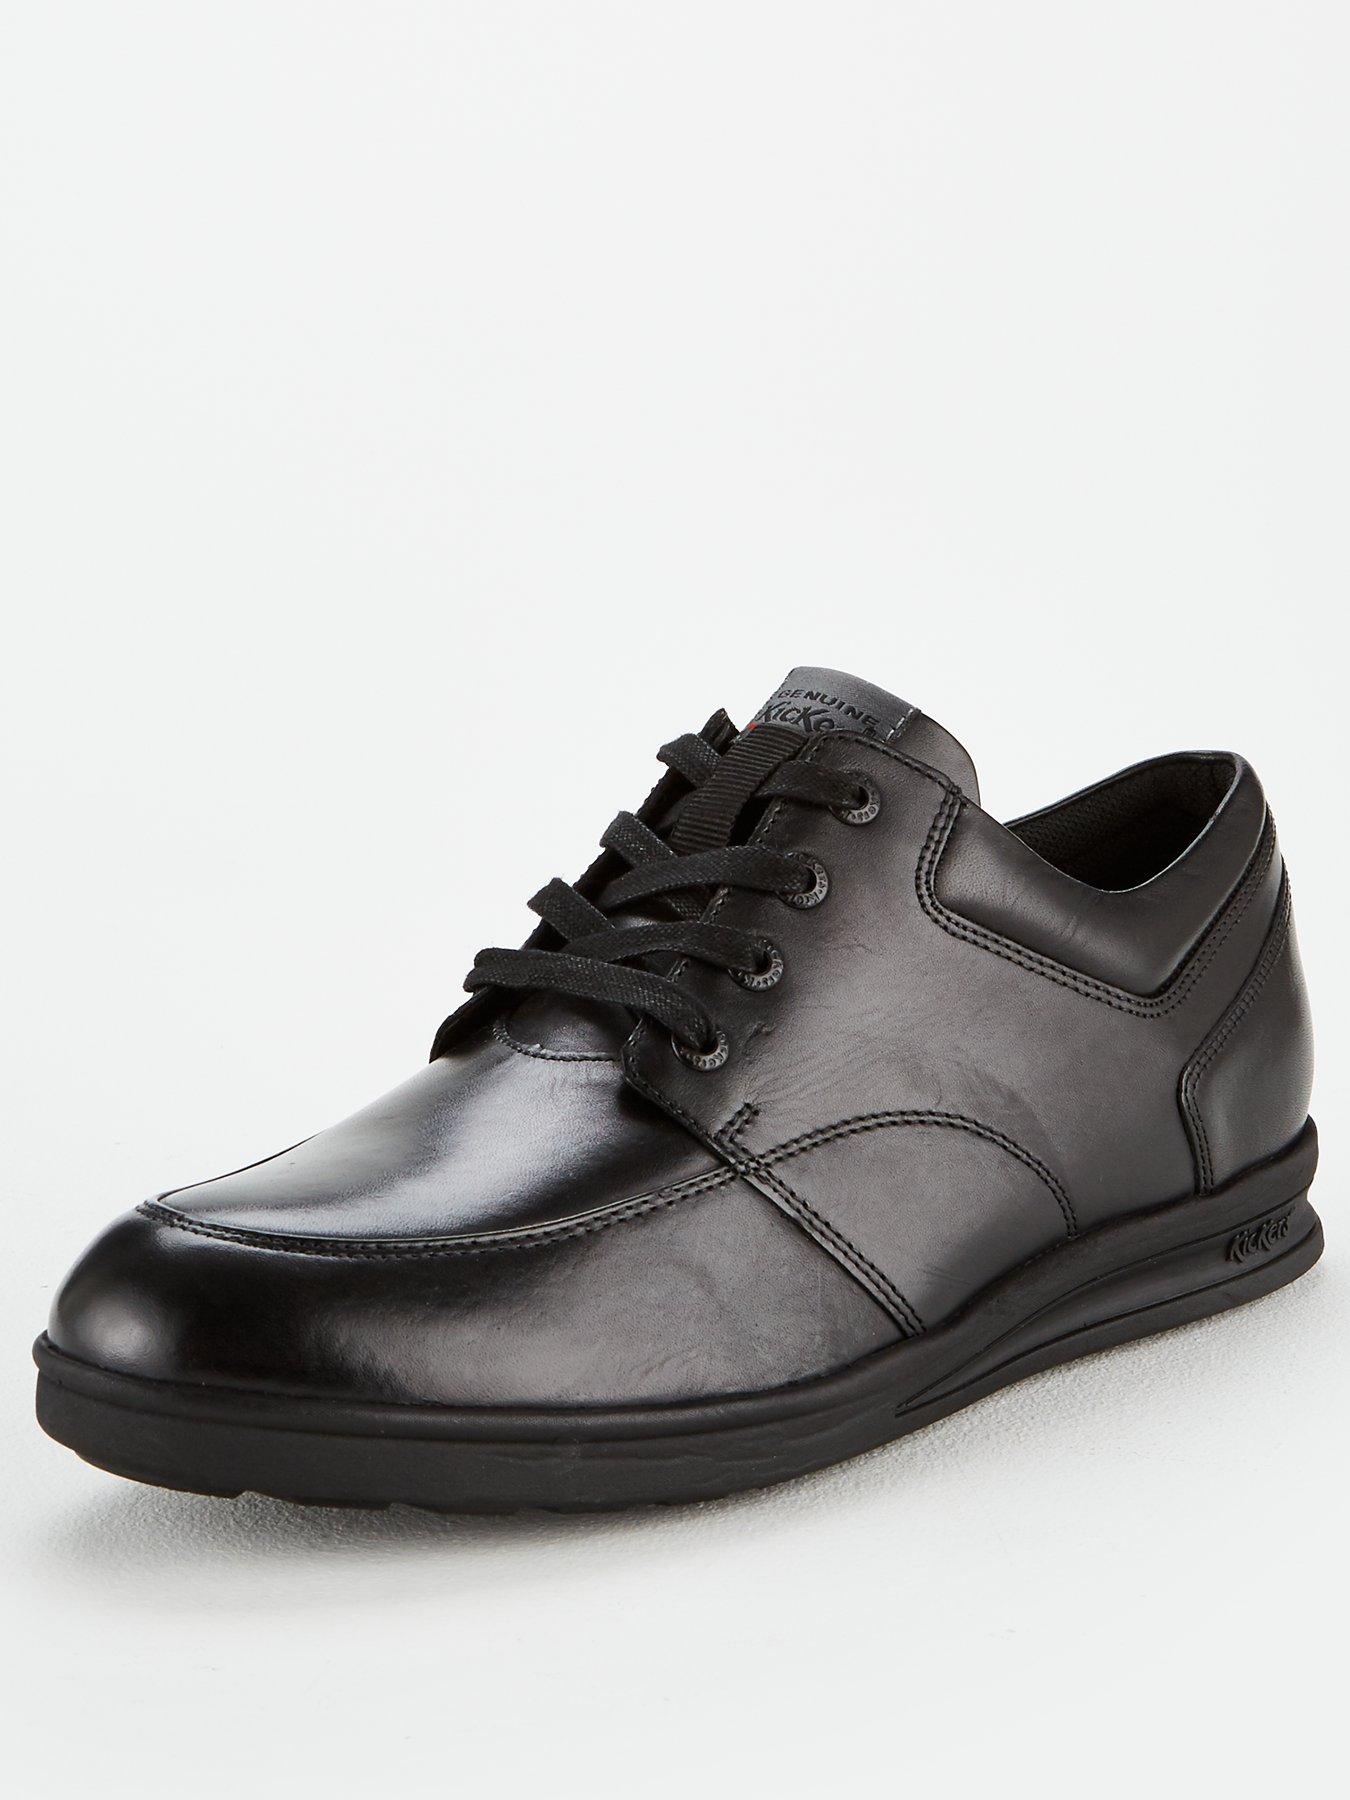 black kickers lace up shoes